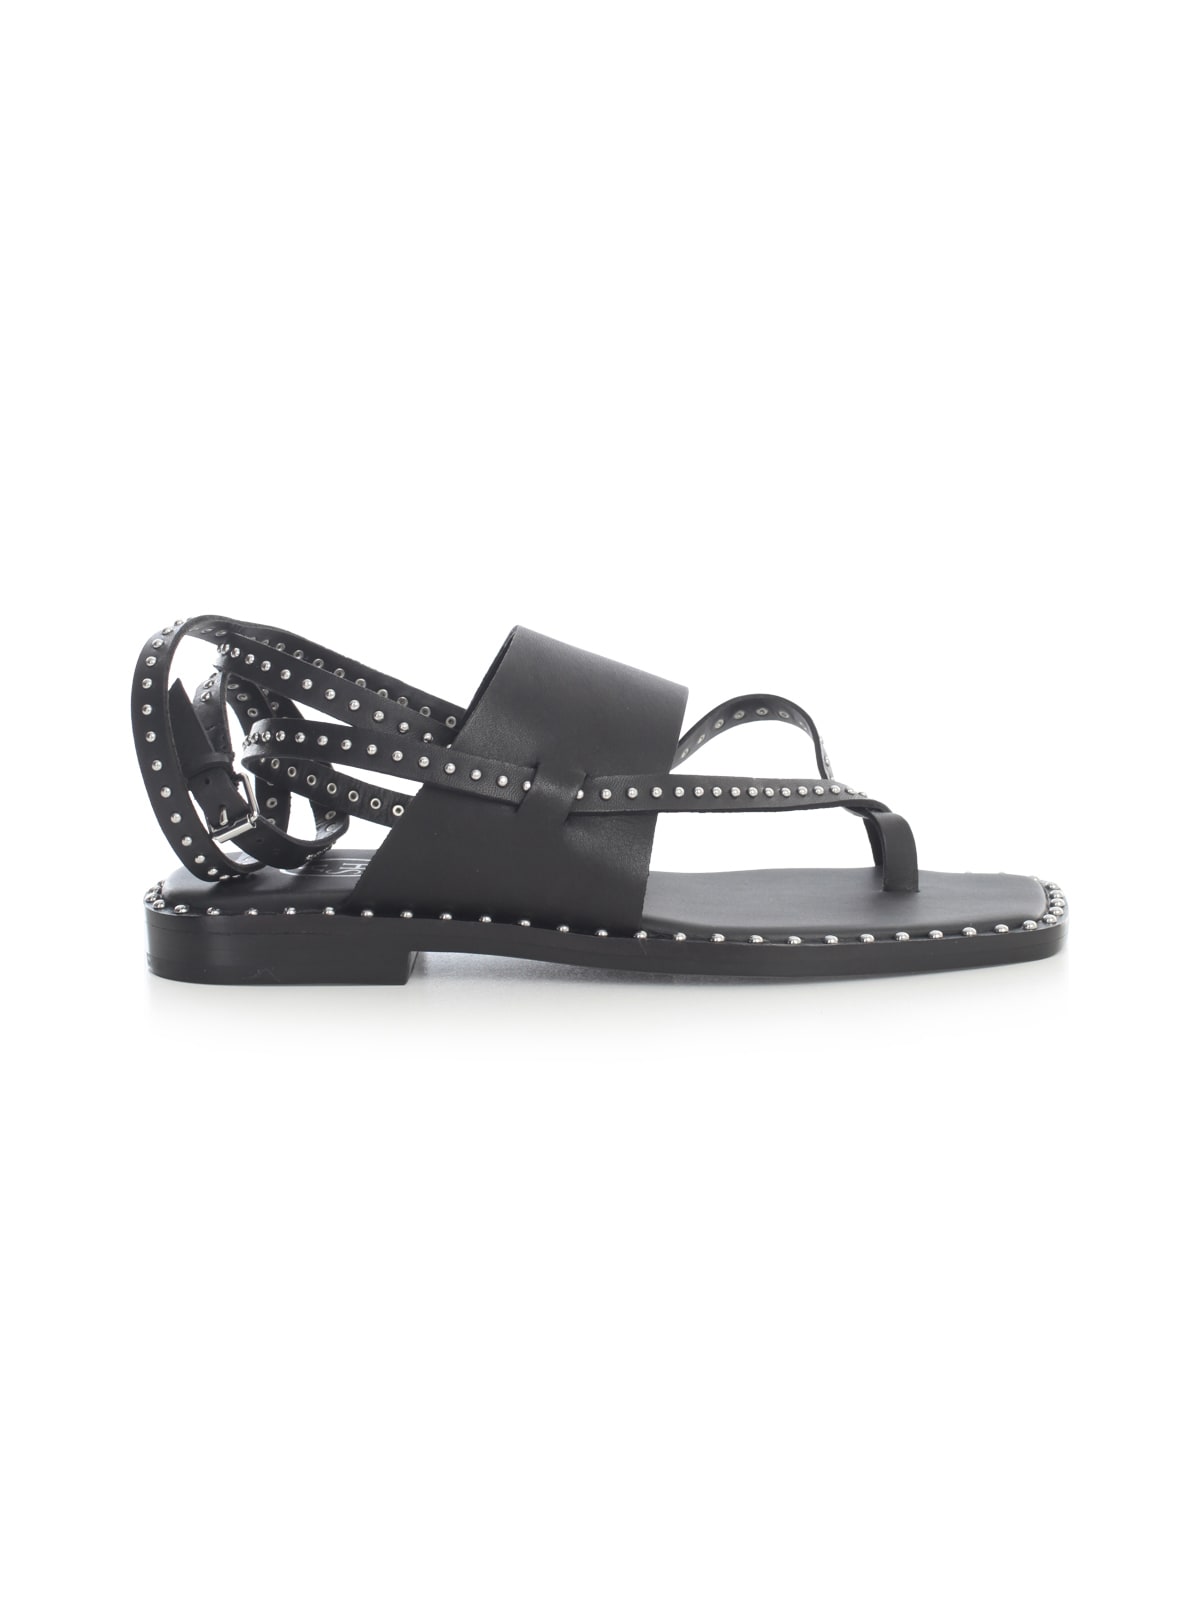 Ash Sandals W/studs And Large Band